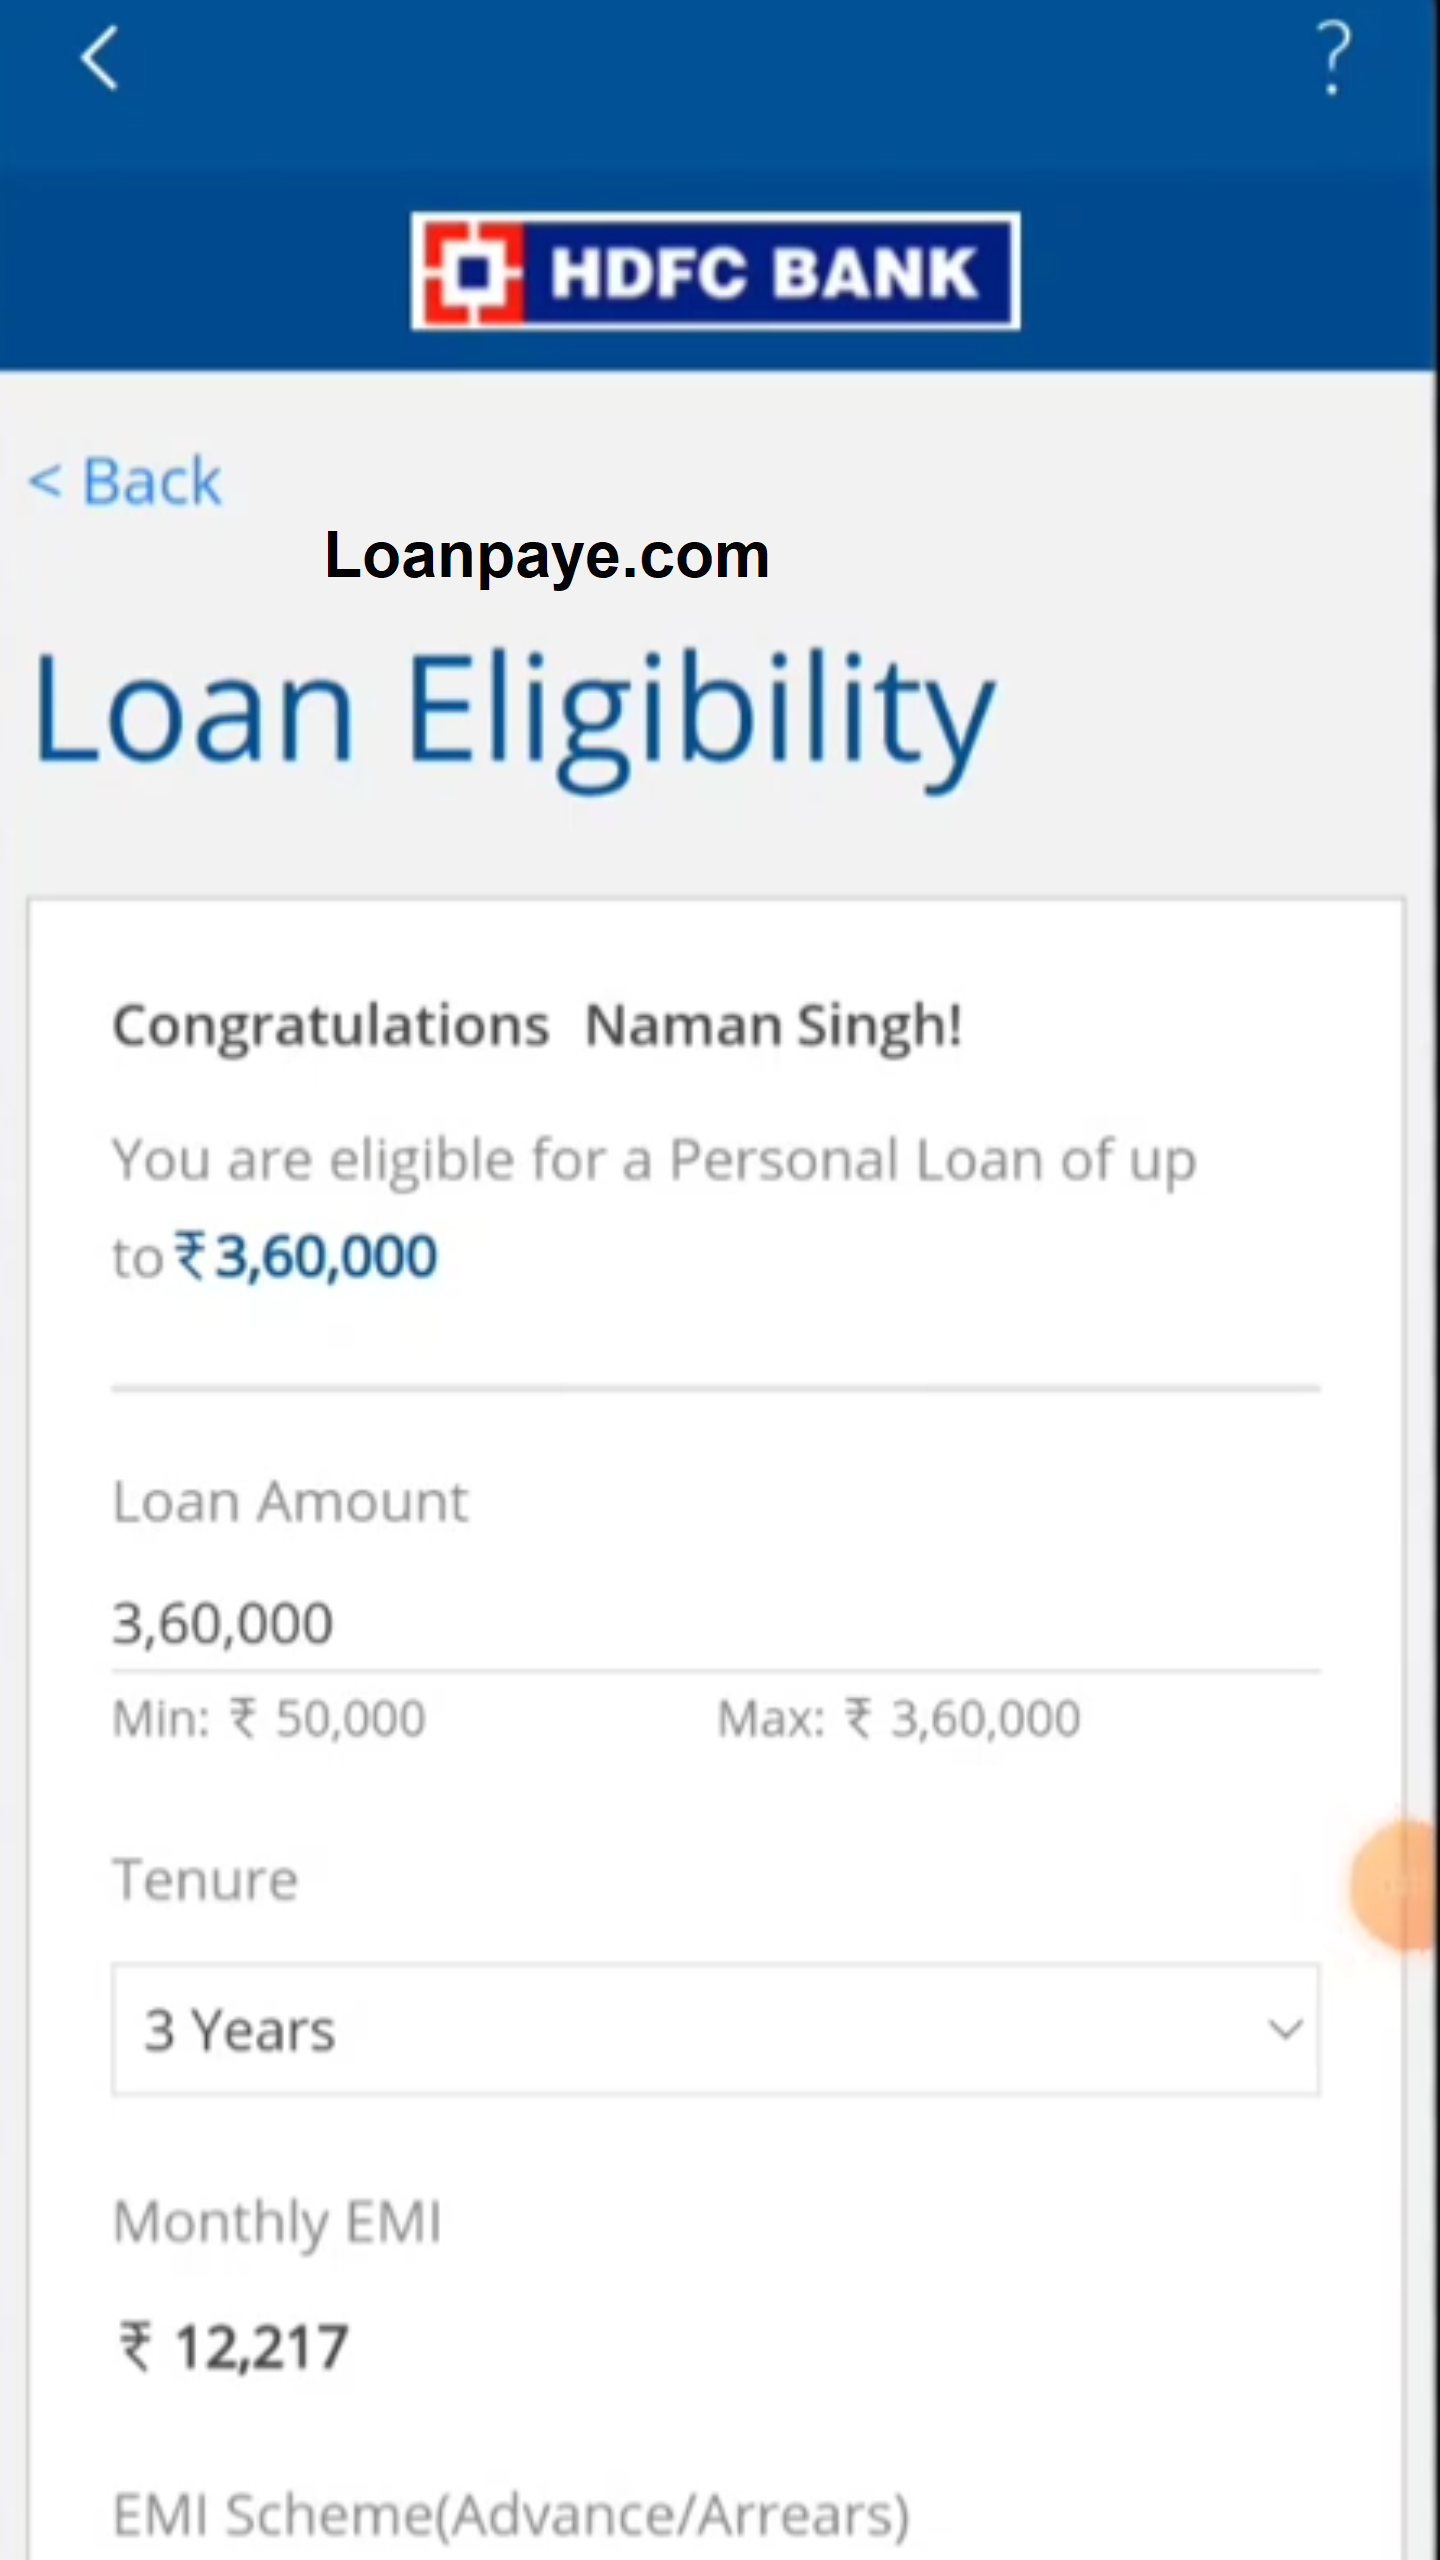 HDFC Bank personal loan online apply process stepby step